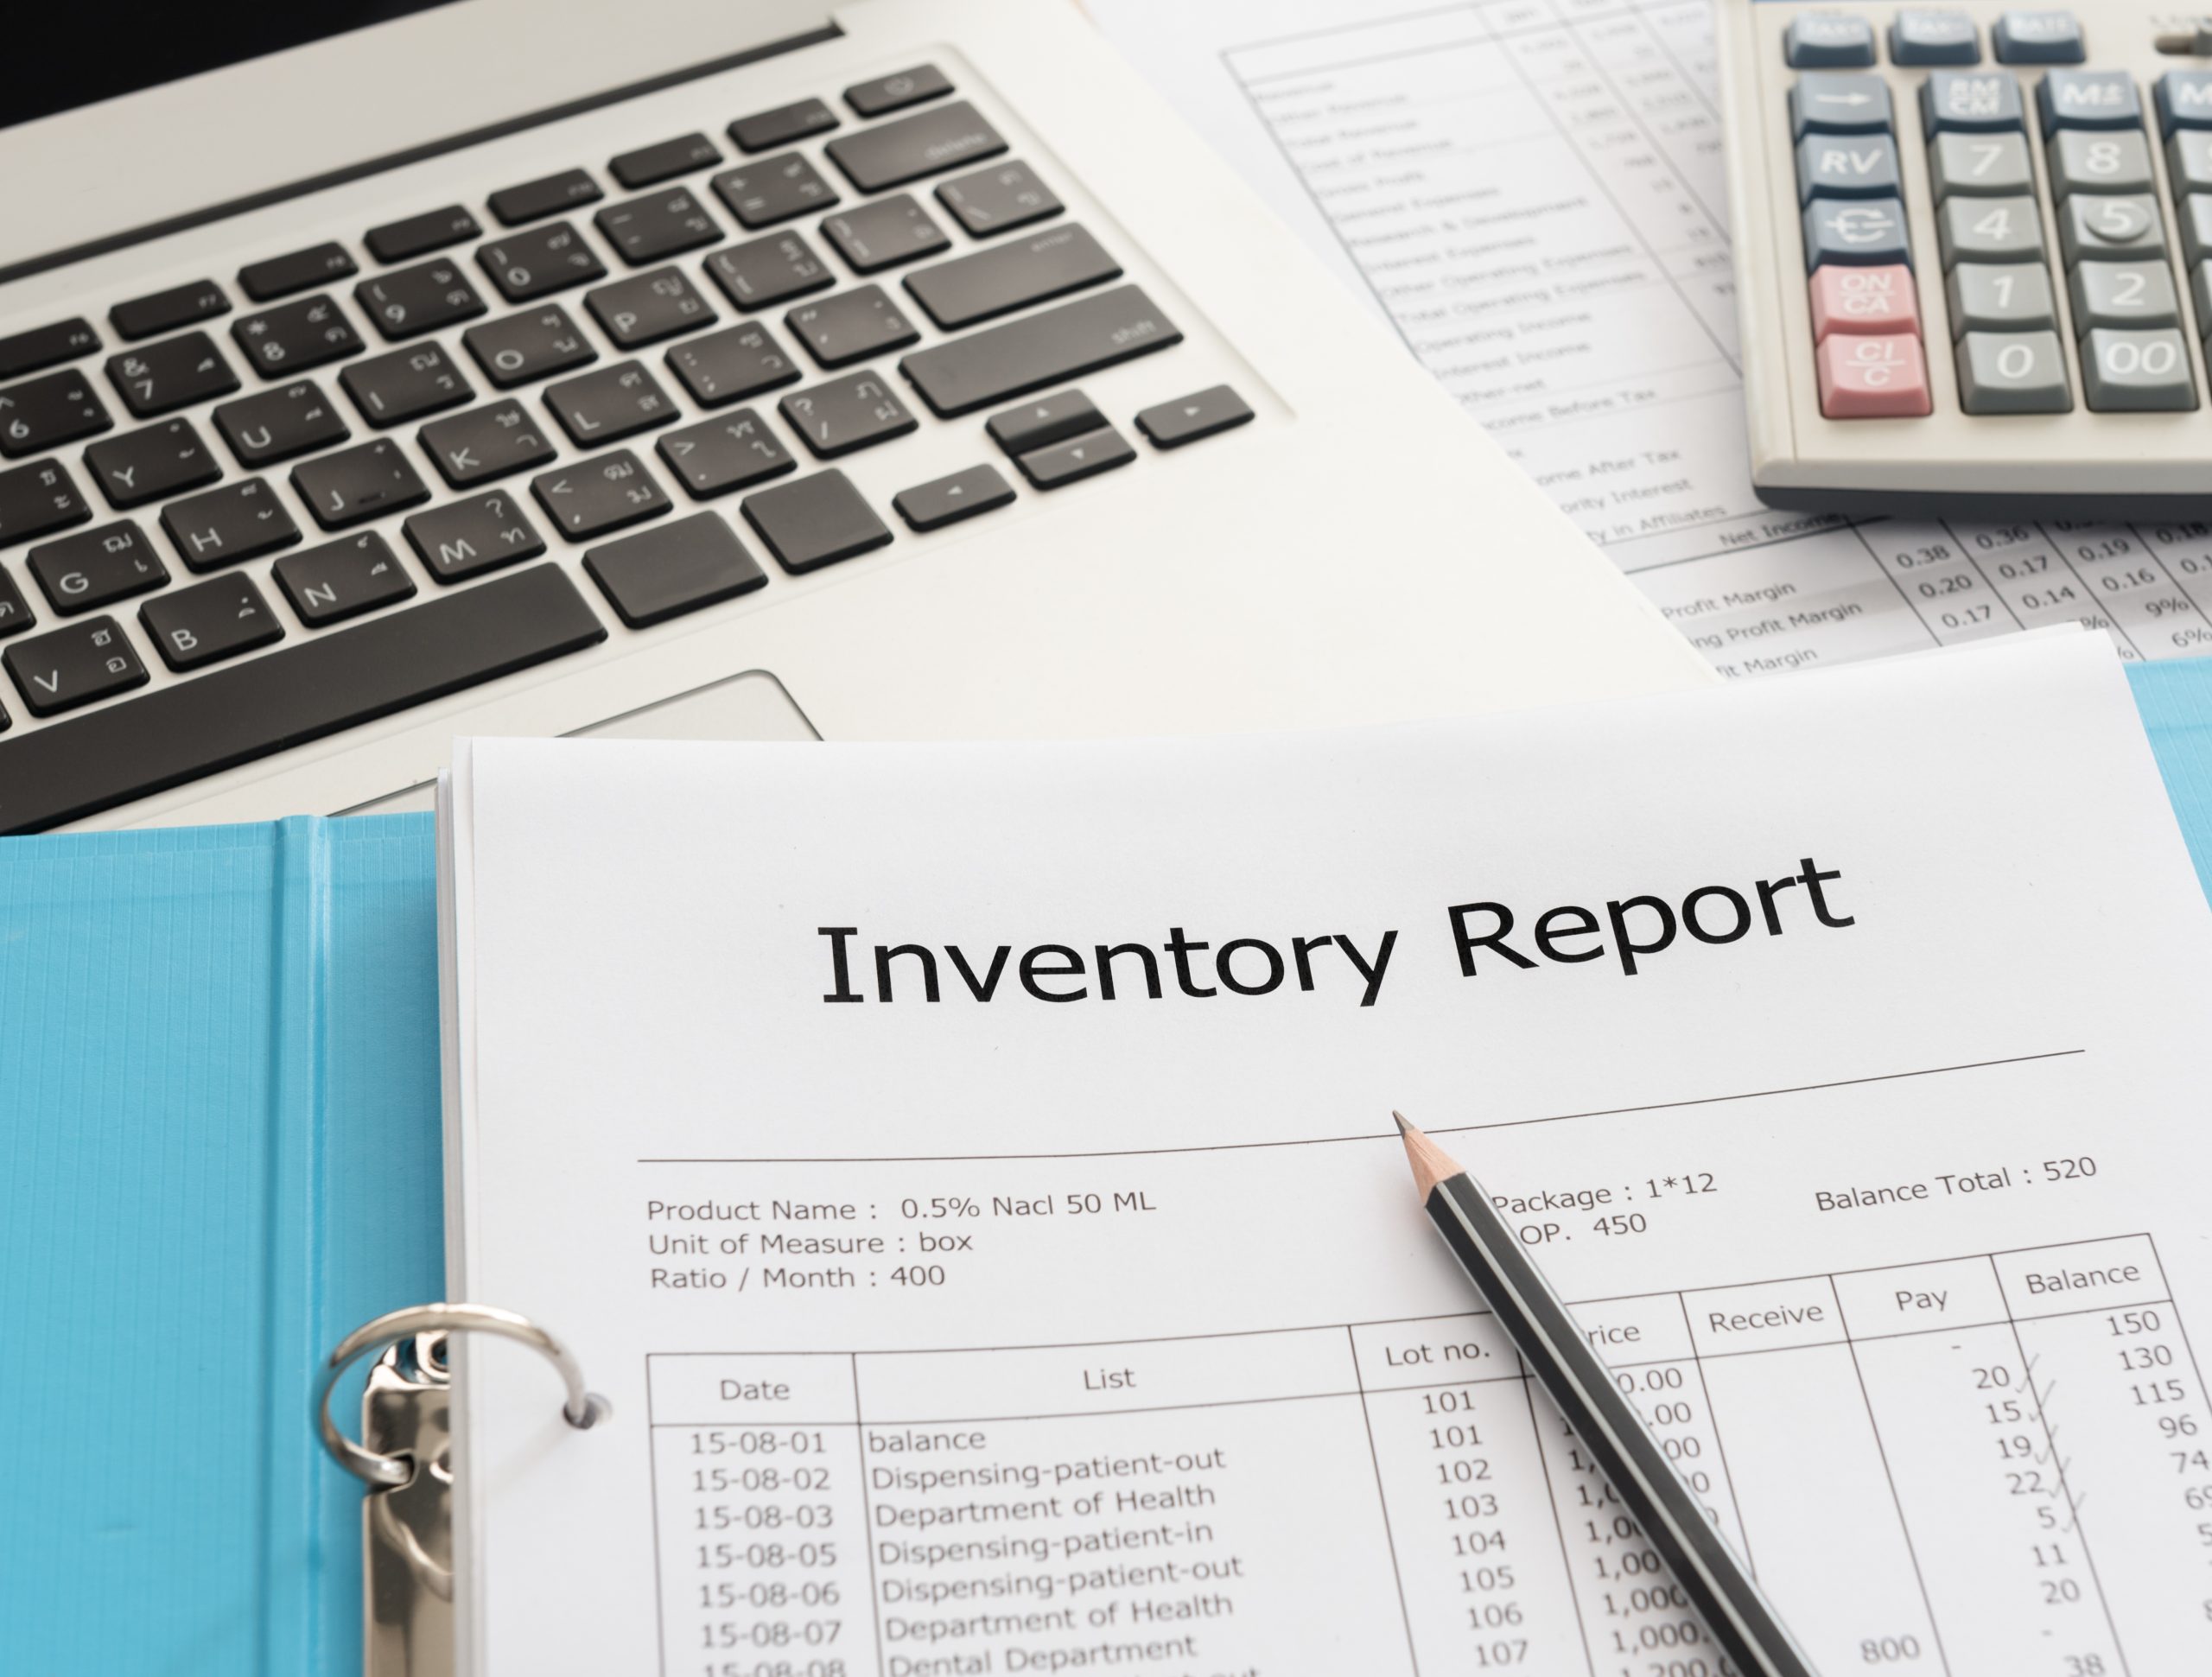 Inventory report on a desk next to a laptop and a calculator